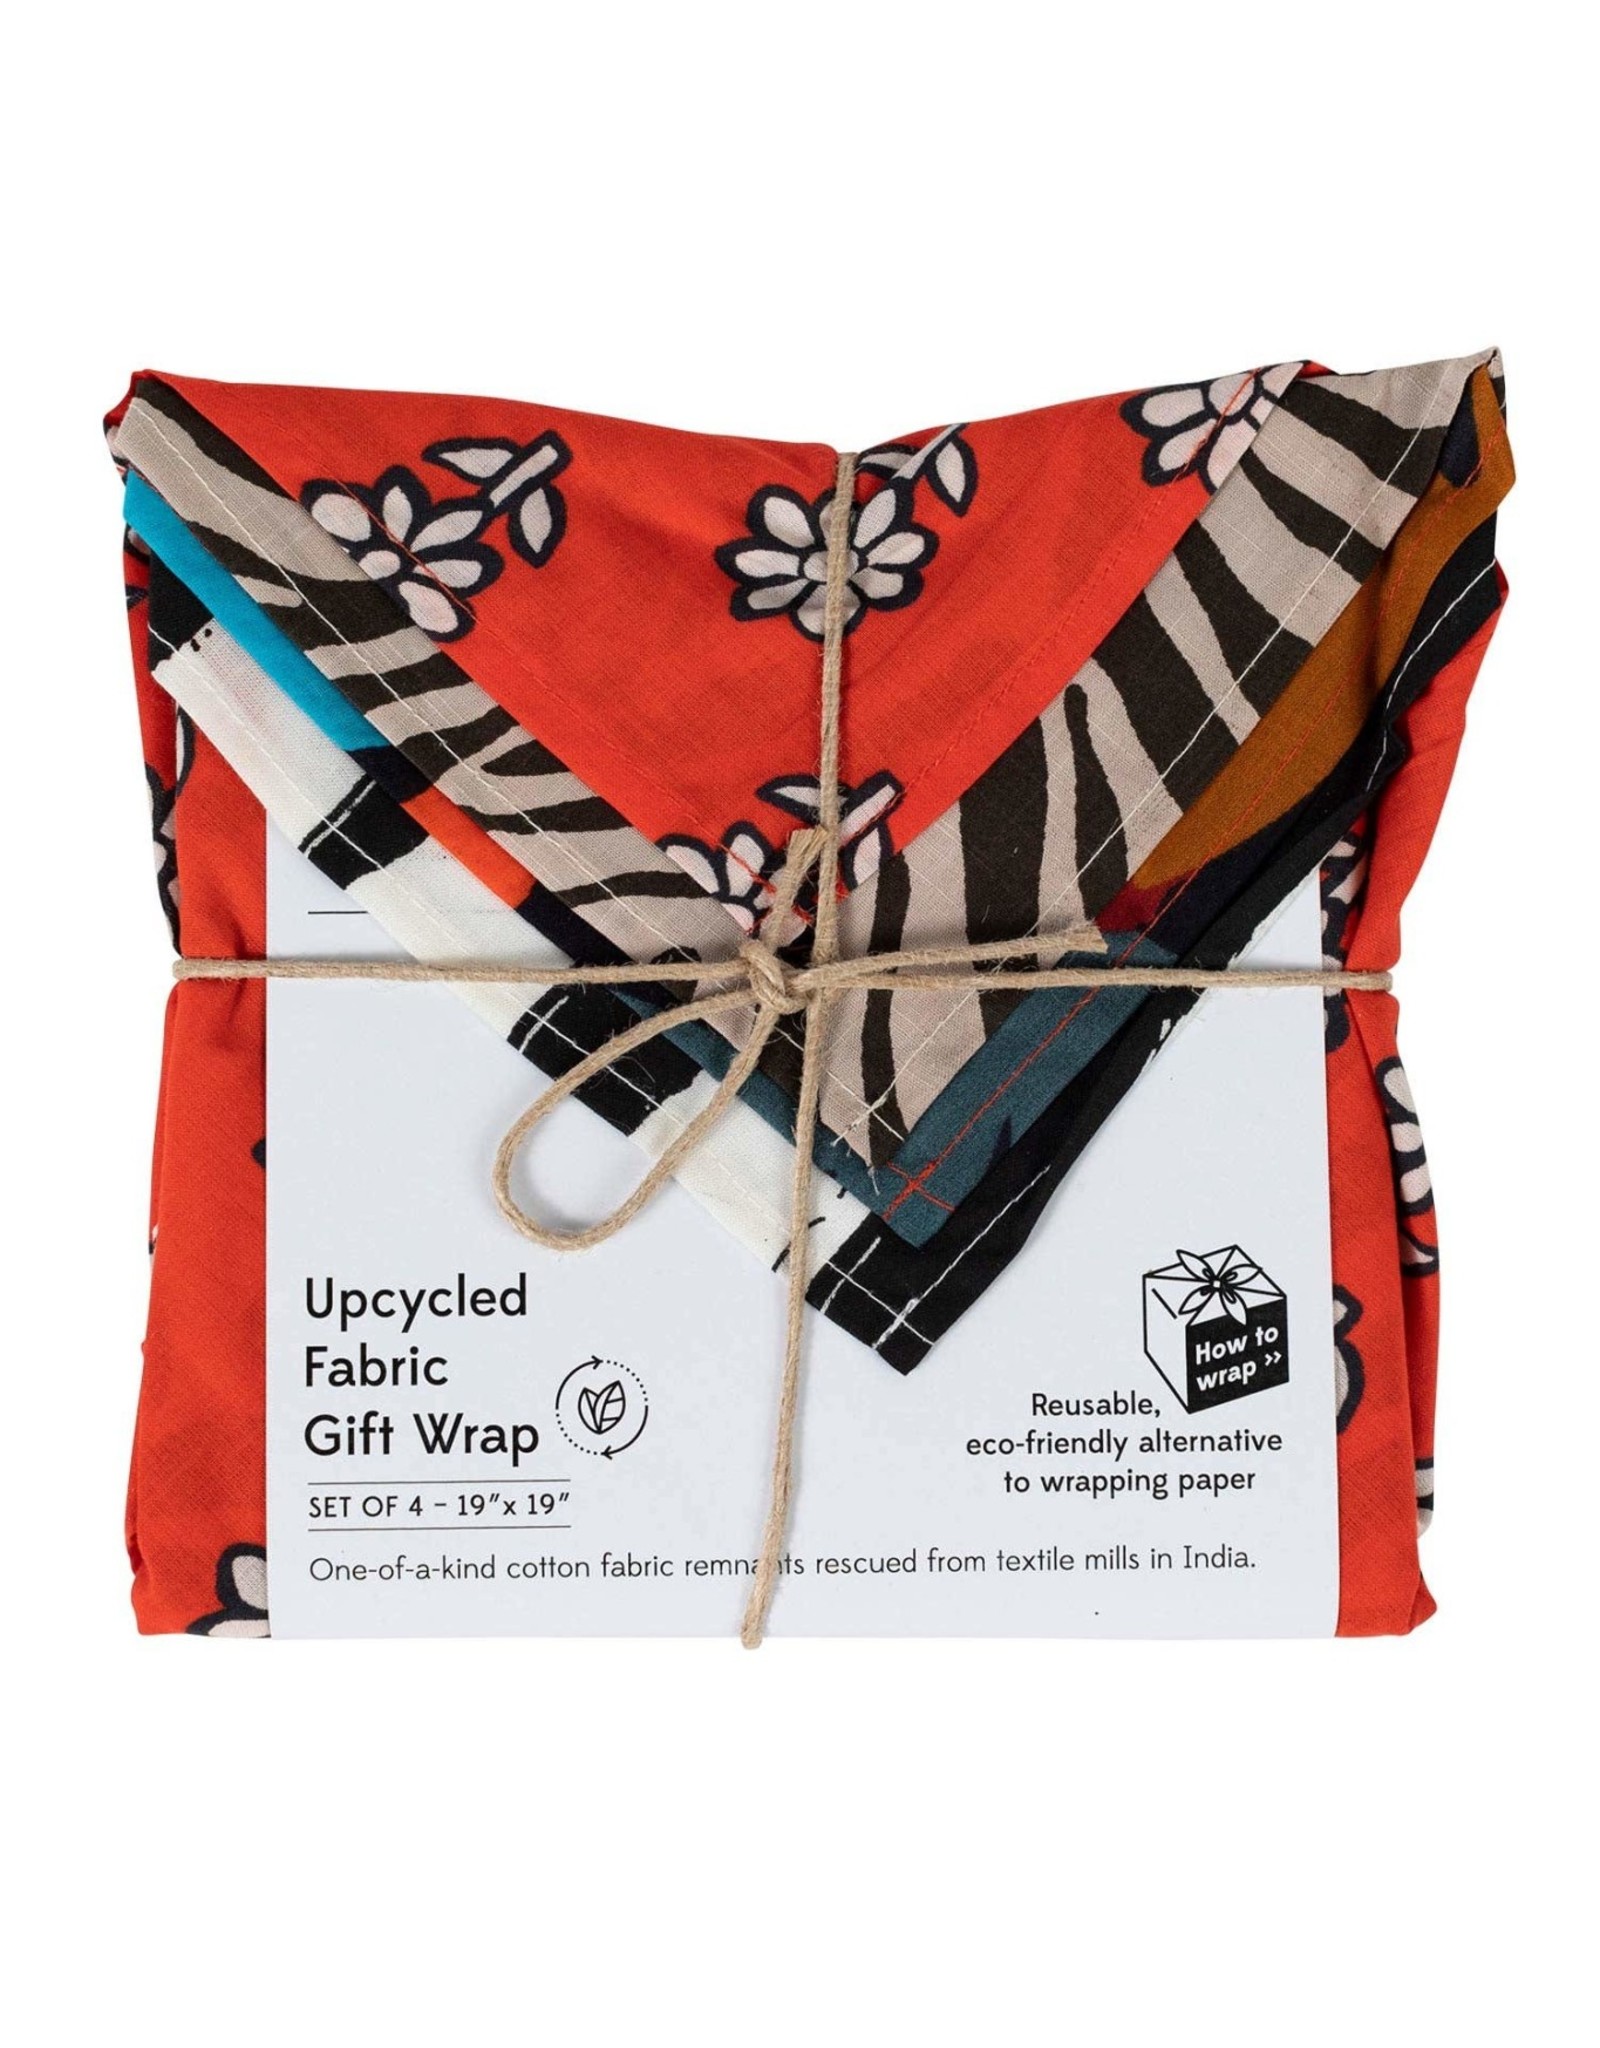 Ten Thousand Villages Upcycled Gift Wrap Set